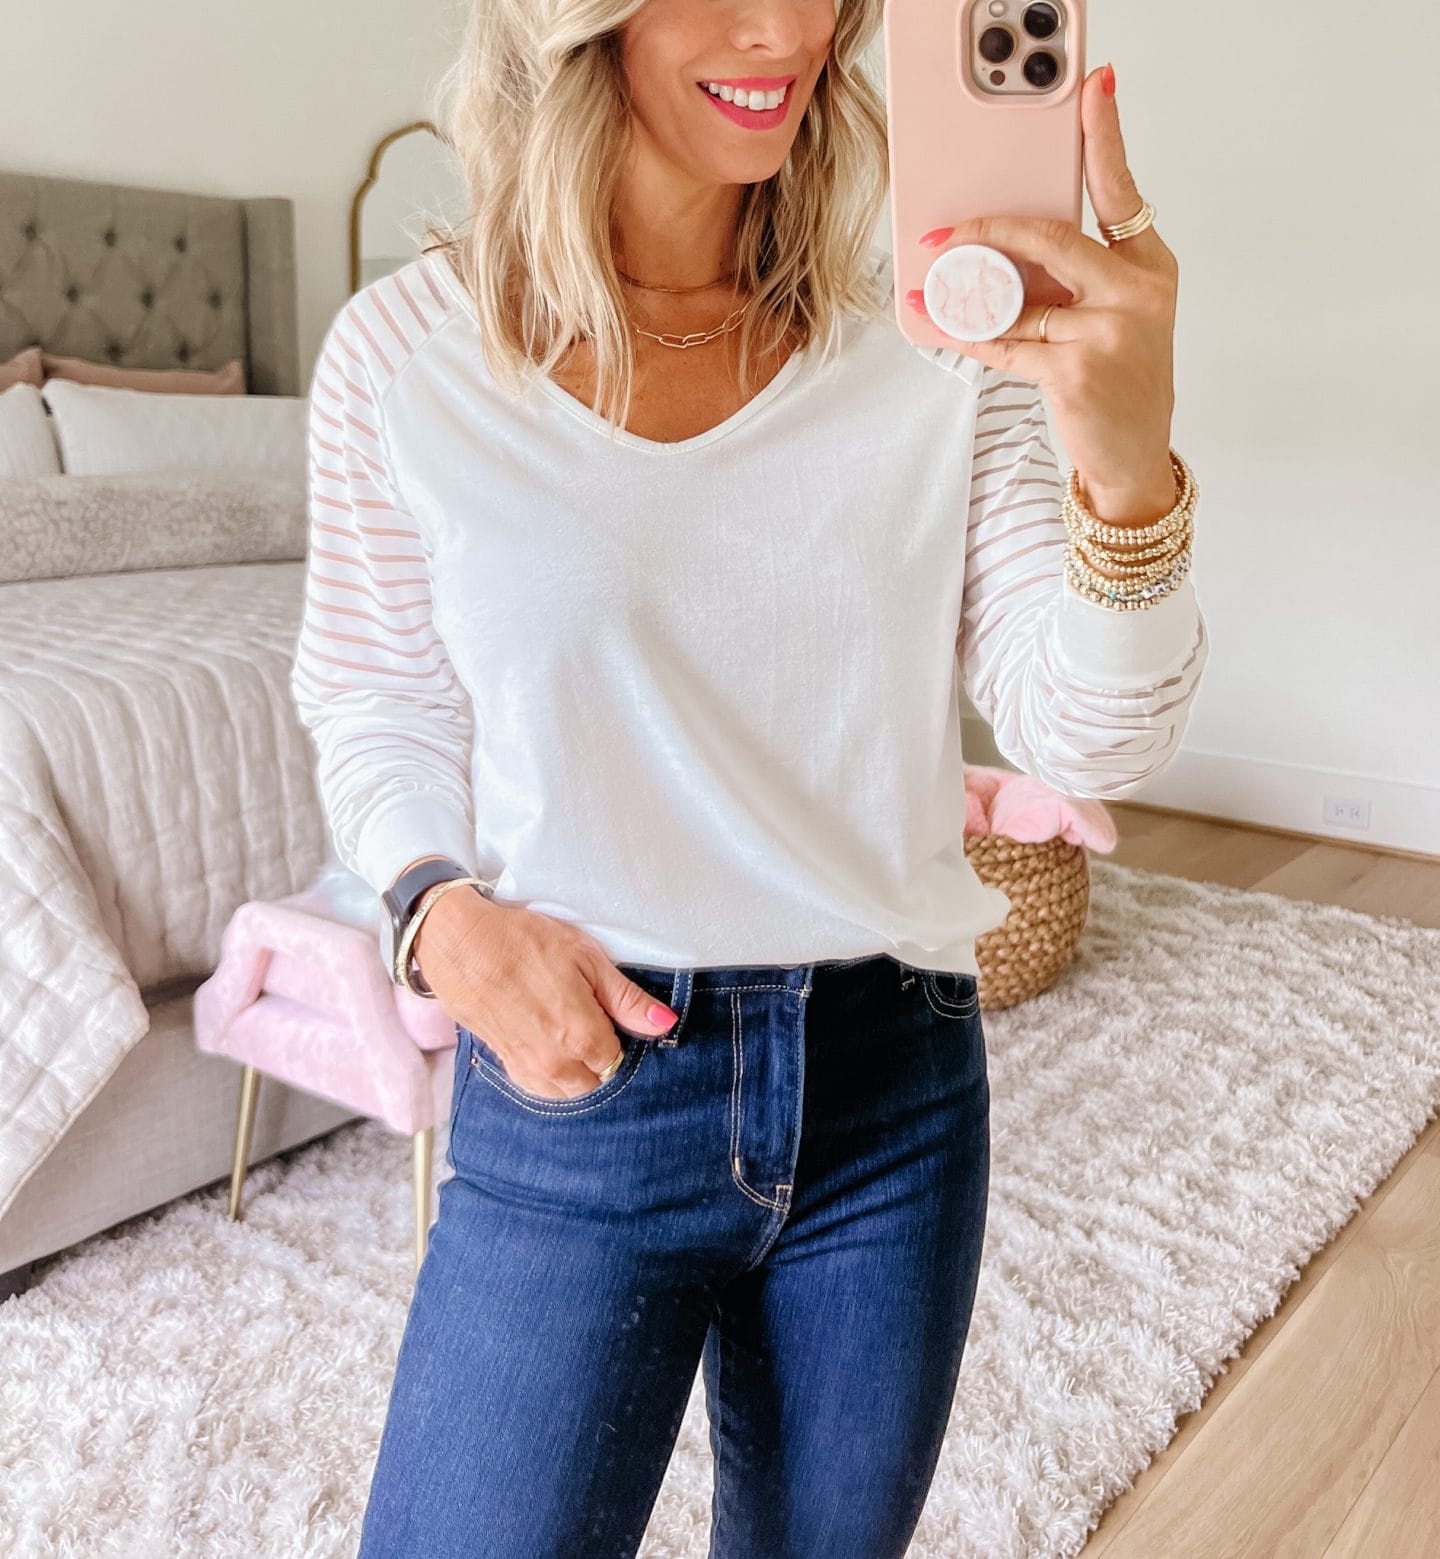 Mesh Striped Sleeve Top, Jeans, Booties 